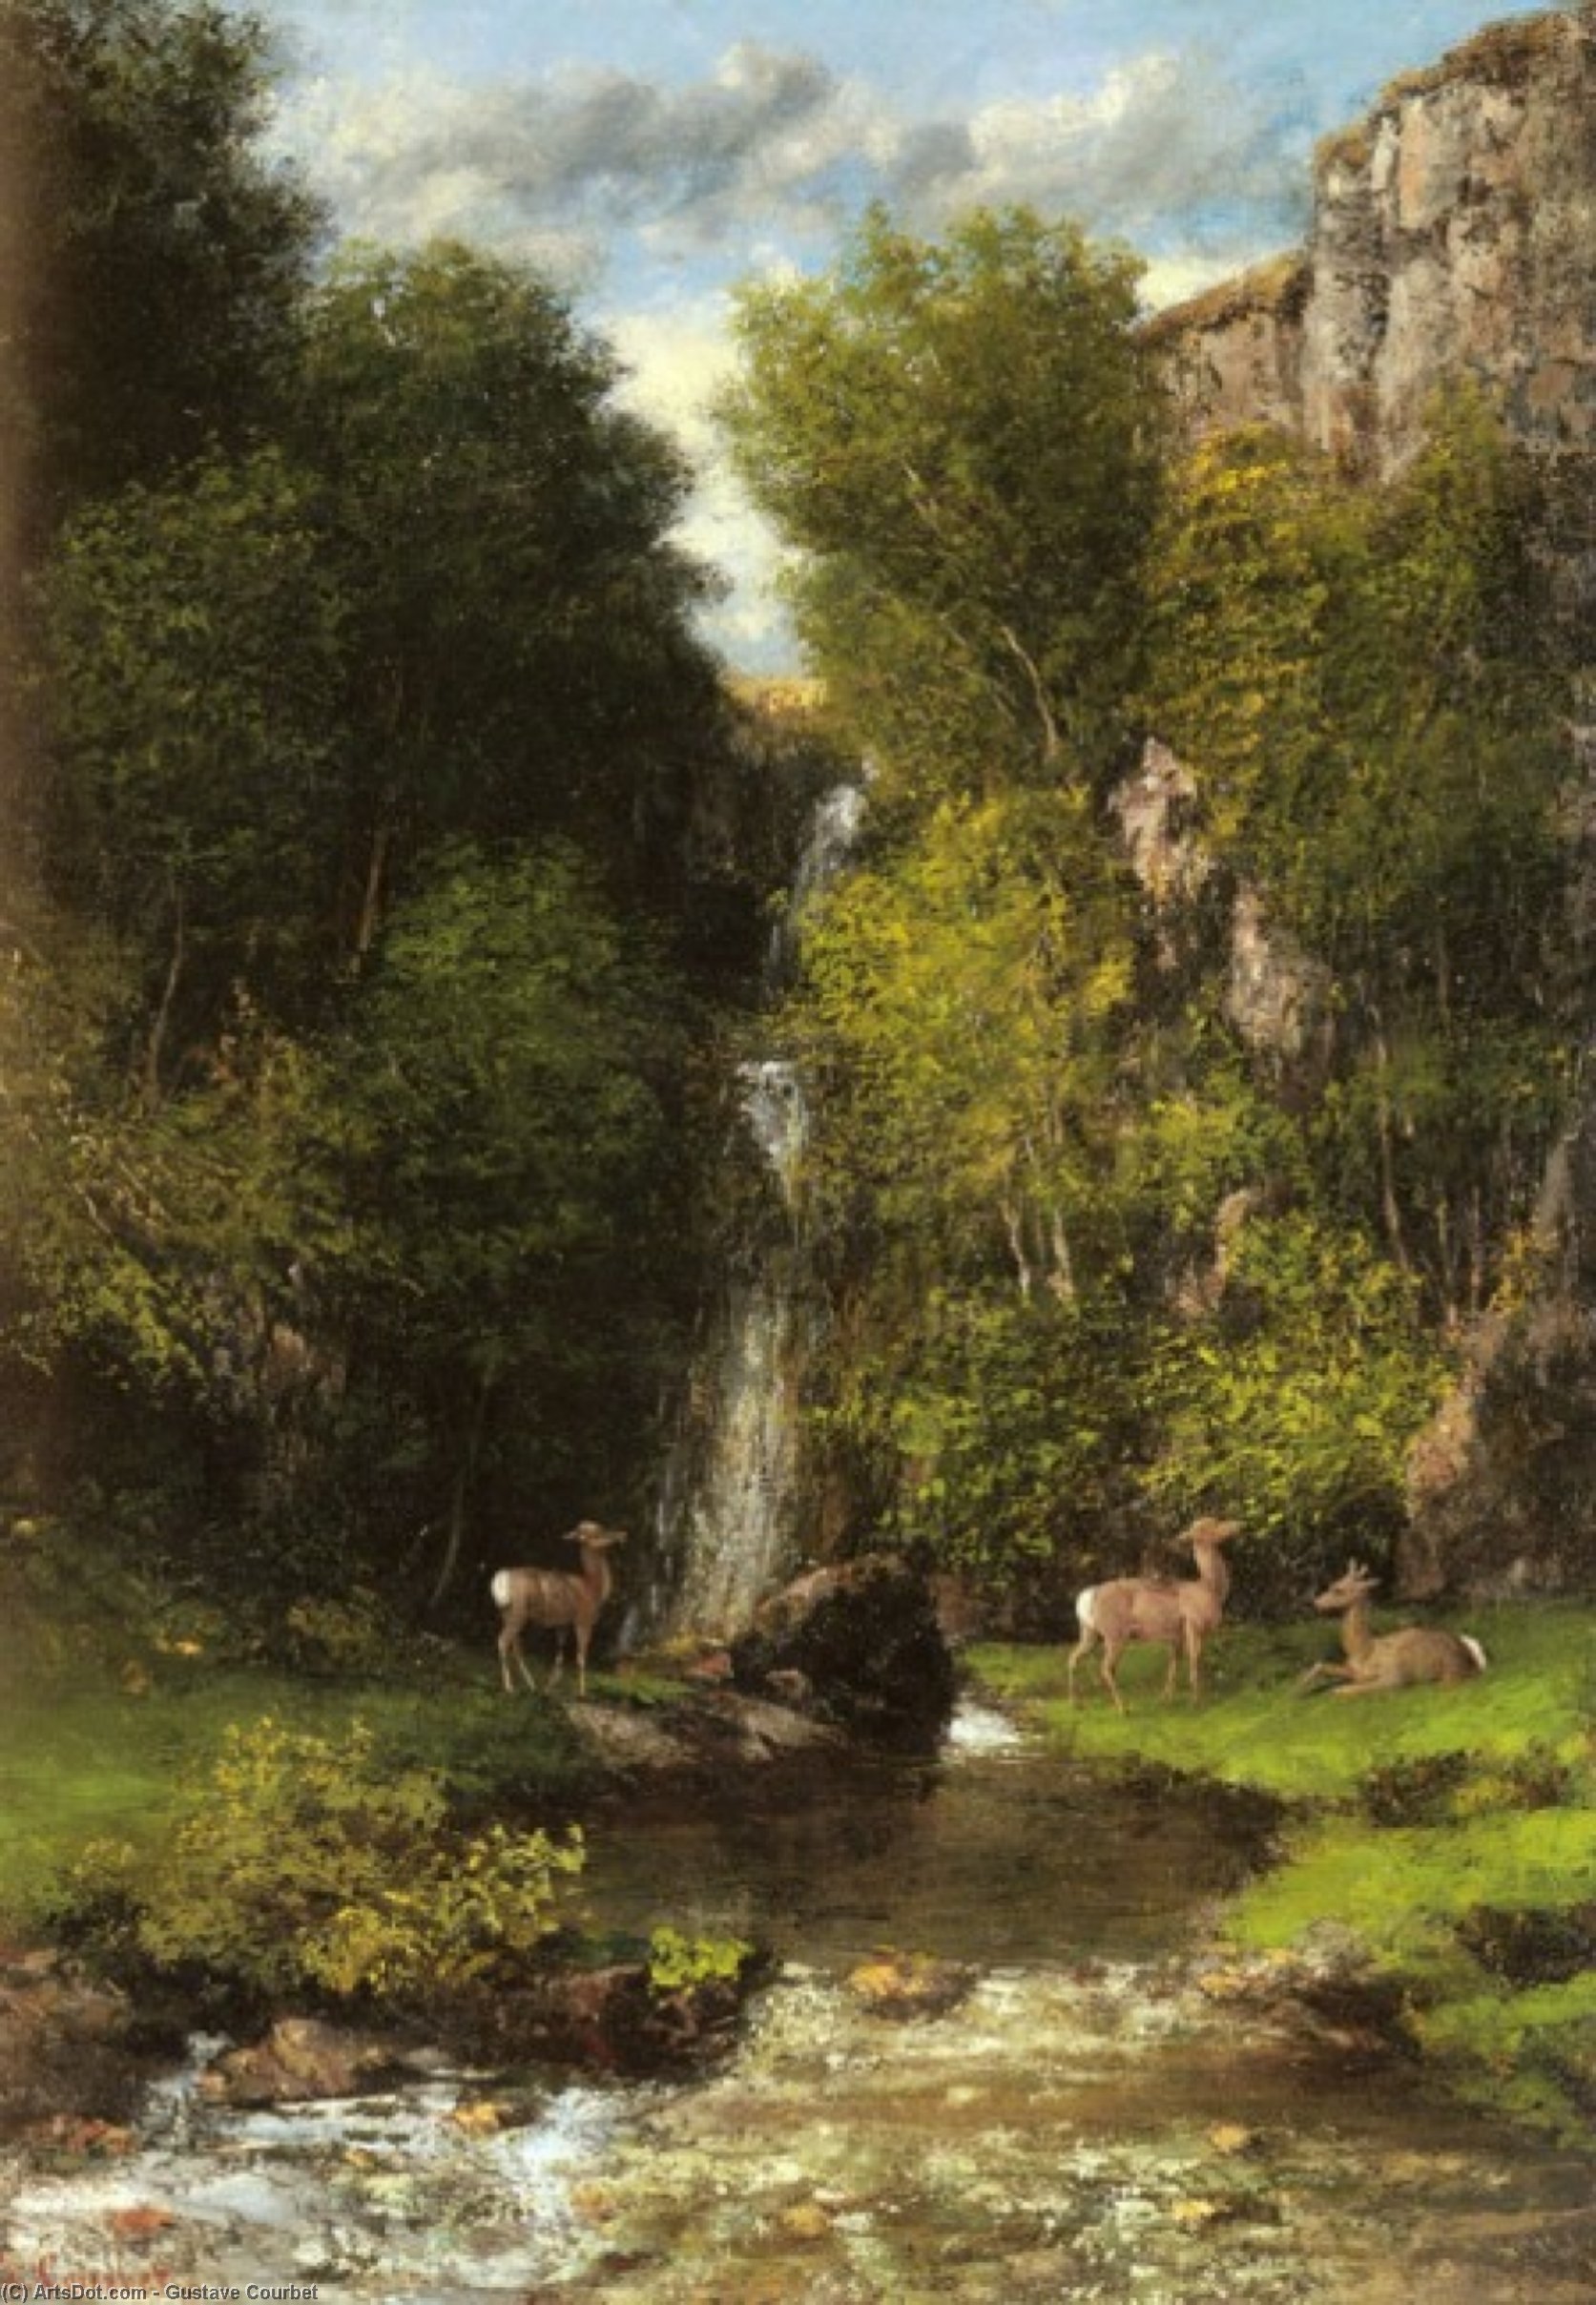 Wikioo.org - Encyklopedia Sztuk Pięknych - Malarstwo, Grafika Gustave Courbet - A Family of Deer in a Landscape with a Waterfall